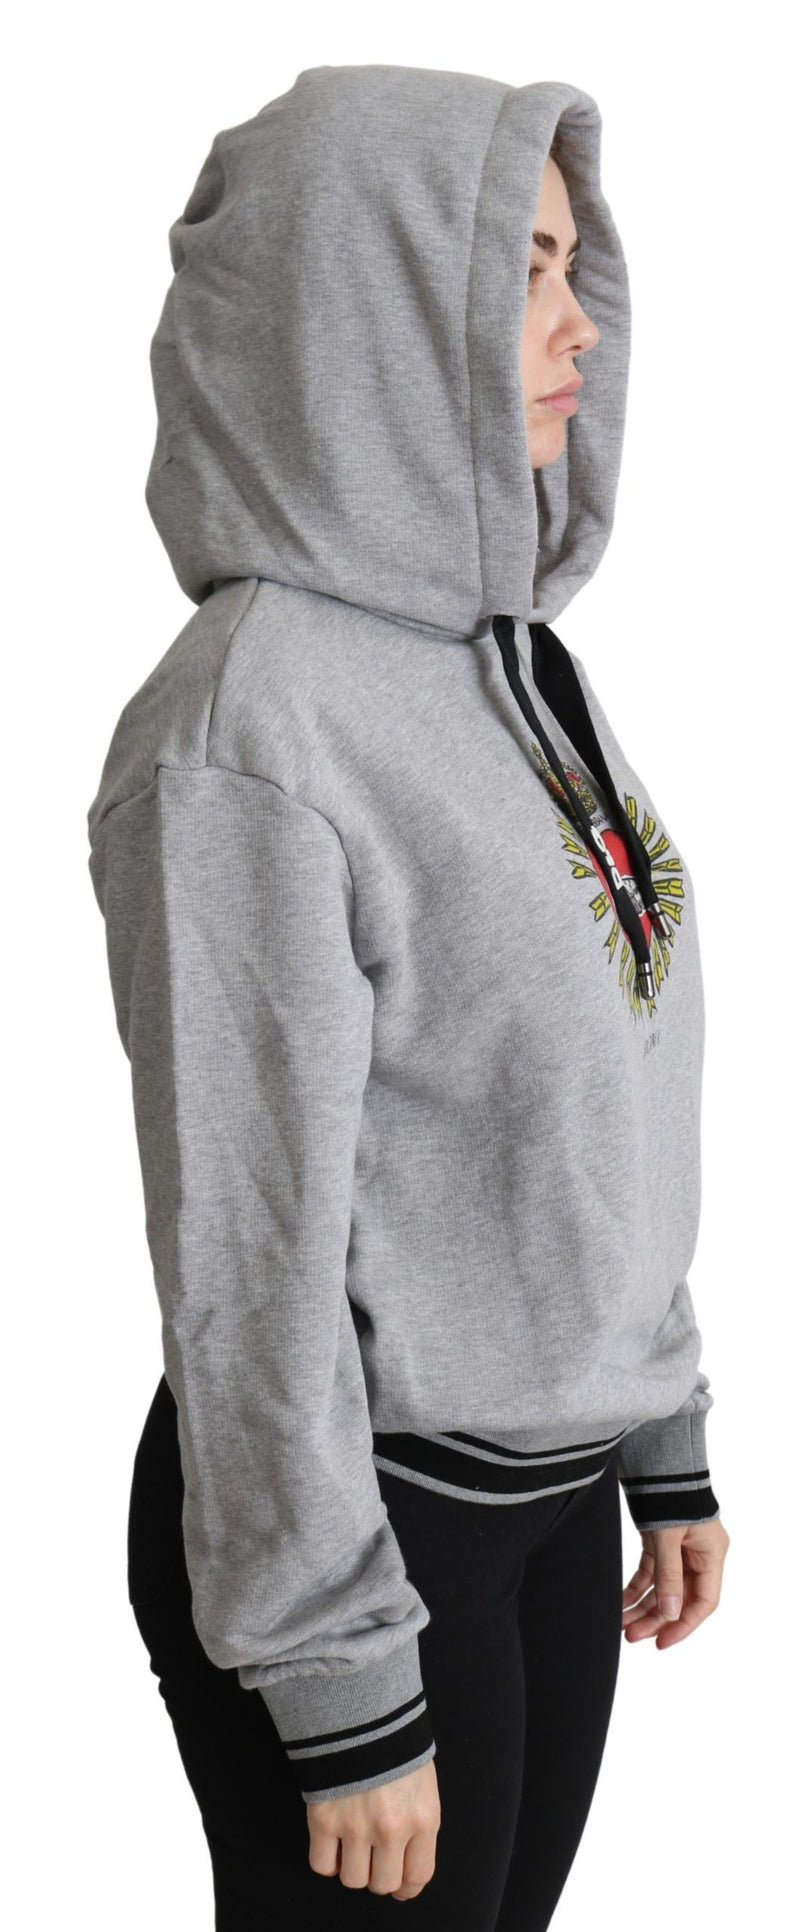 Dolce & Gabbana Gray Printed Hooded Exclusive Logo Women's Sweater